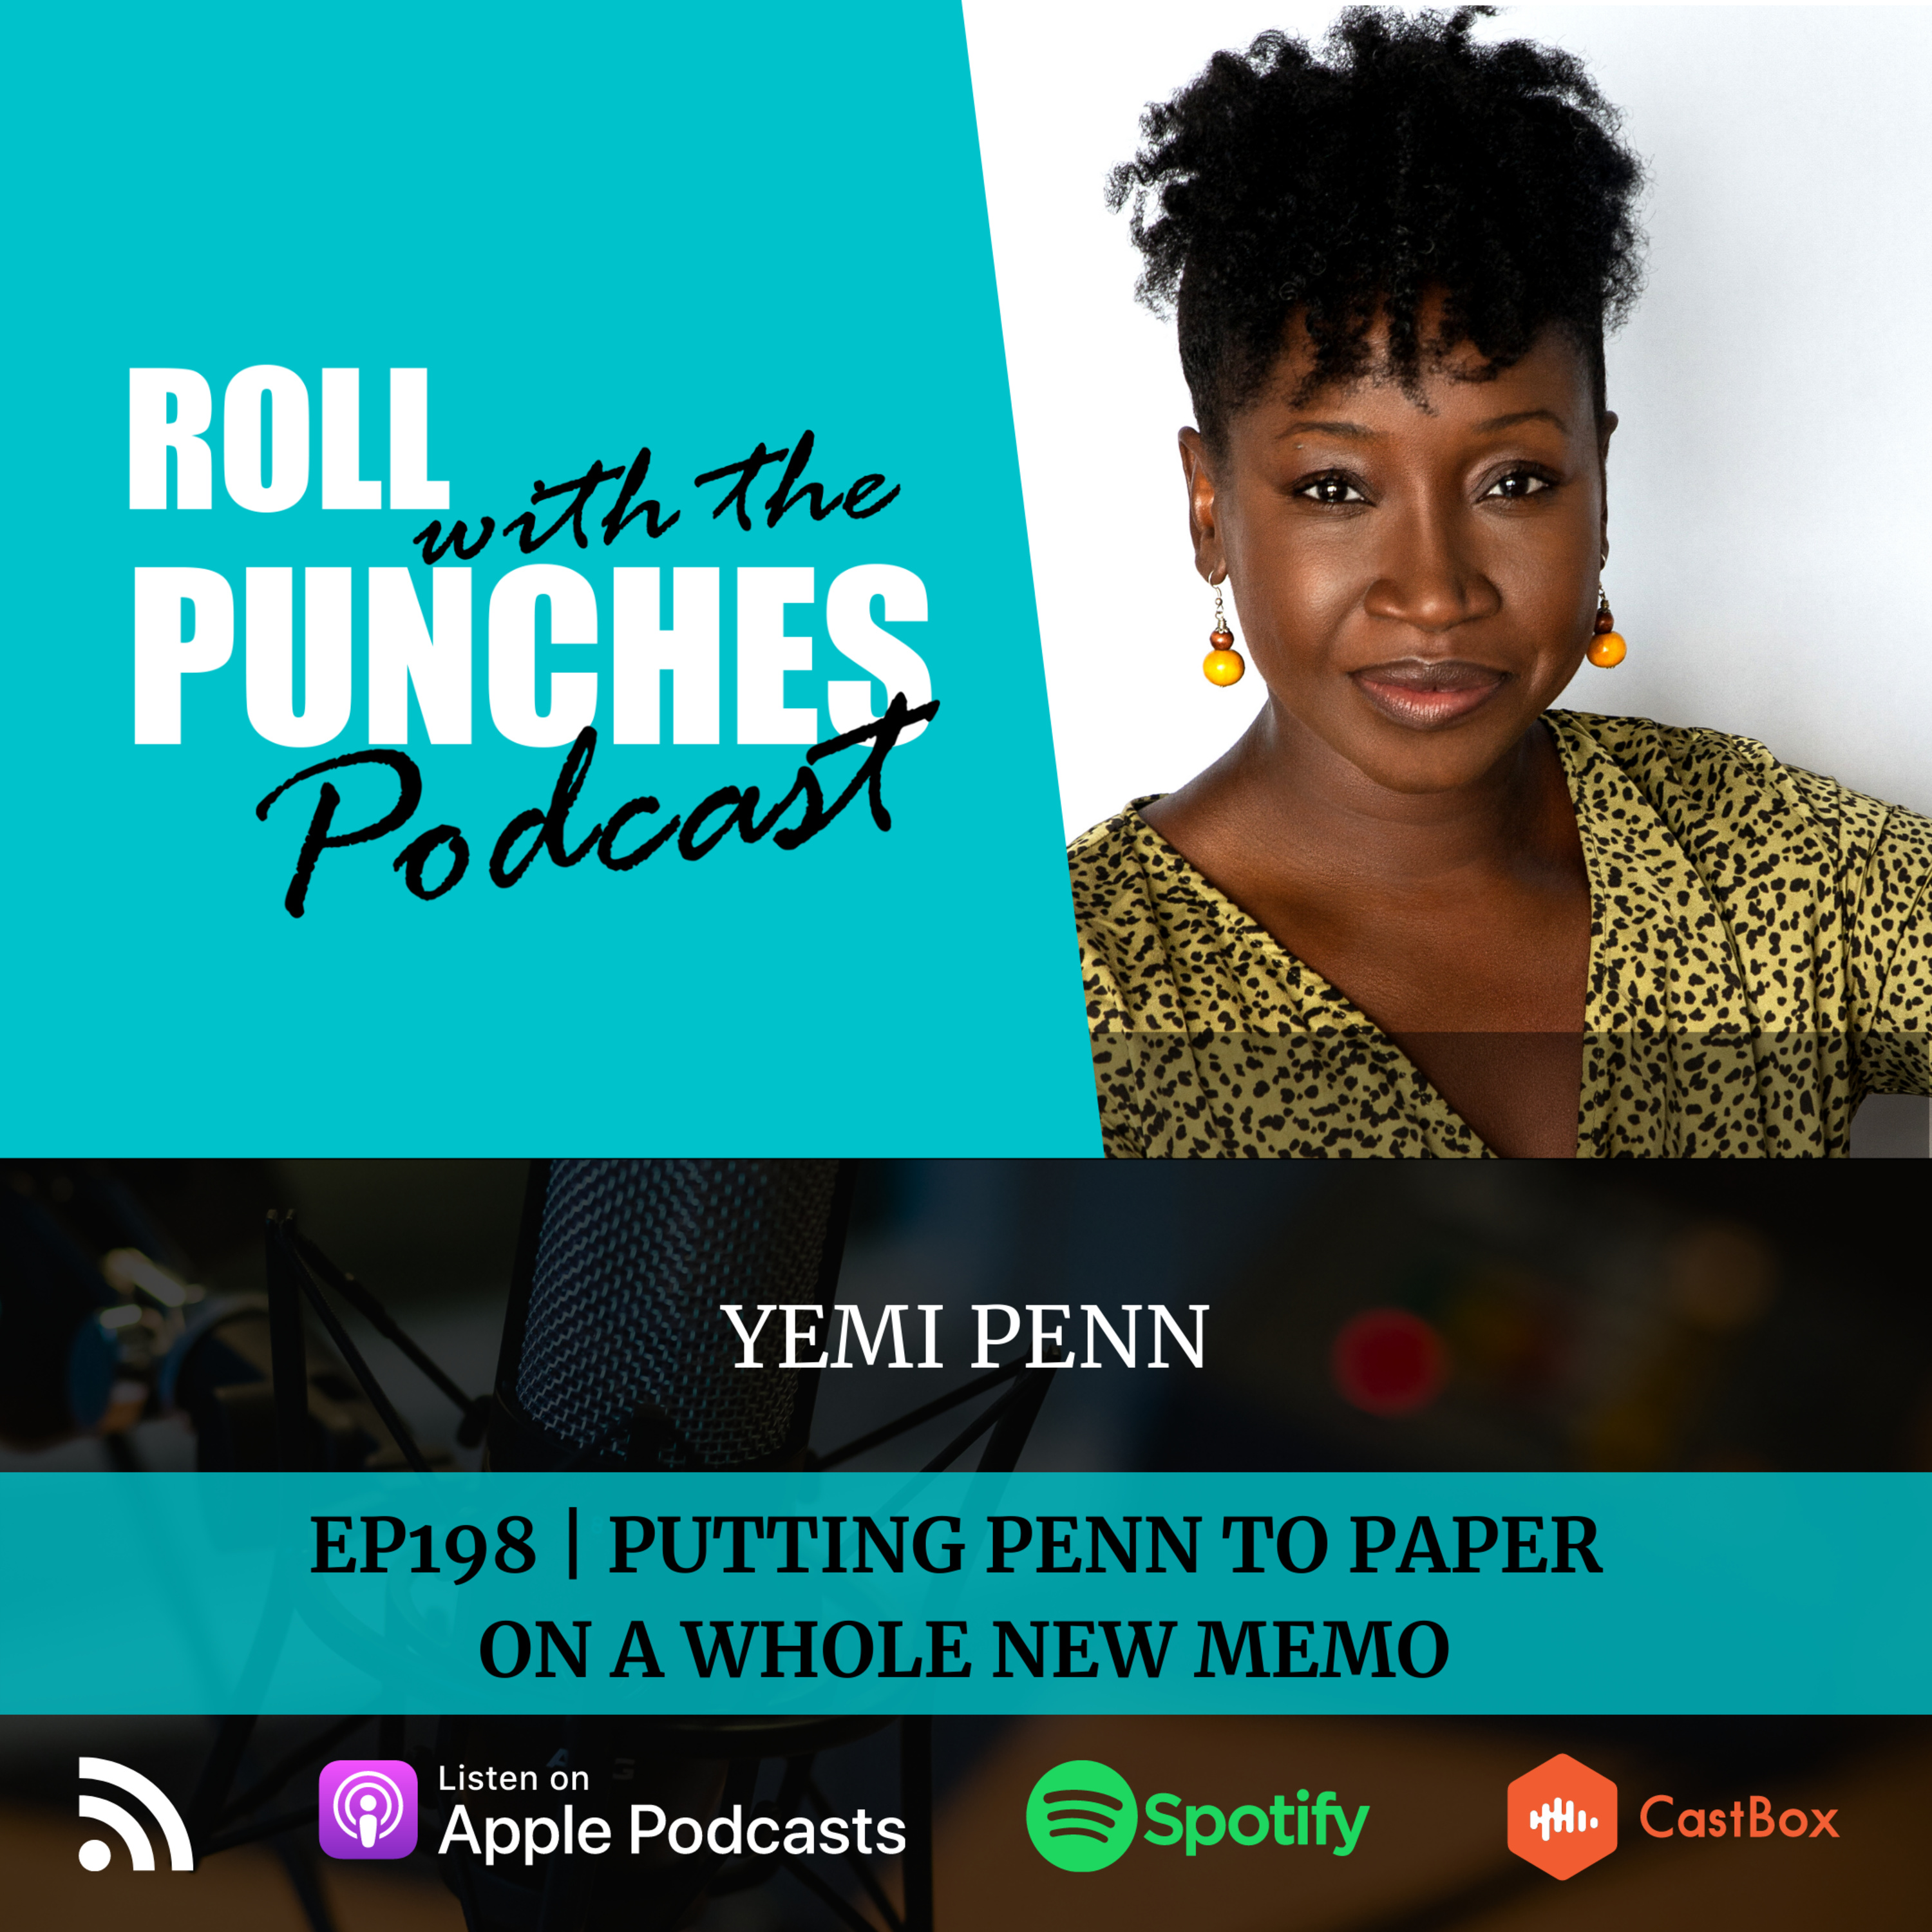 EP198 Putting Penn To Paper On A Whole New Memo | Yemi Penn